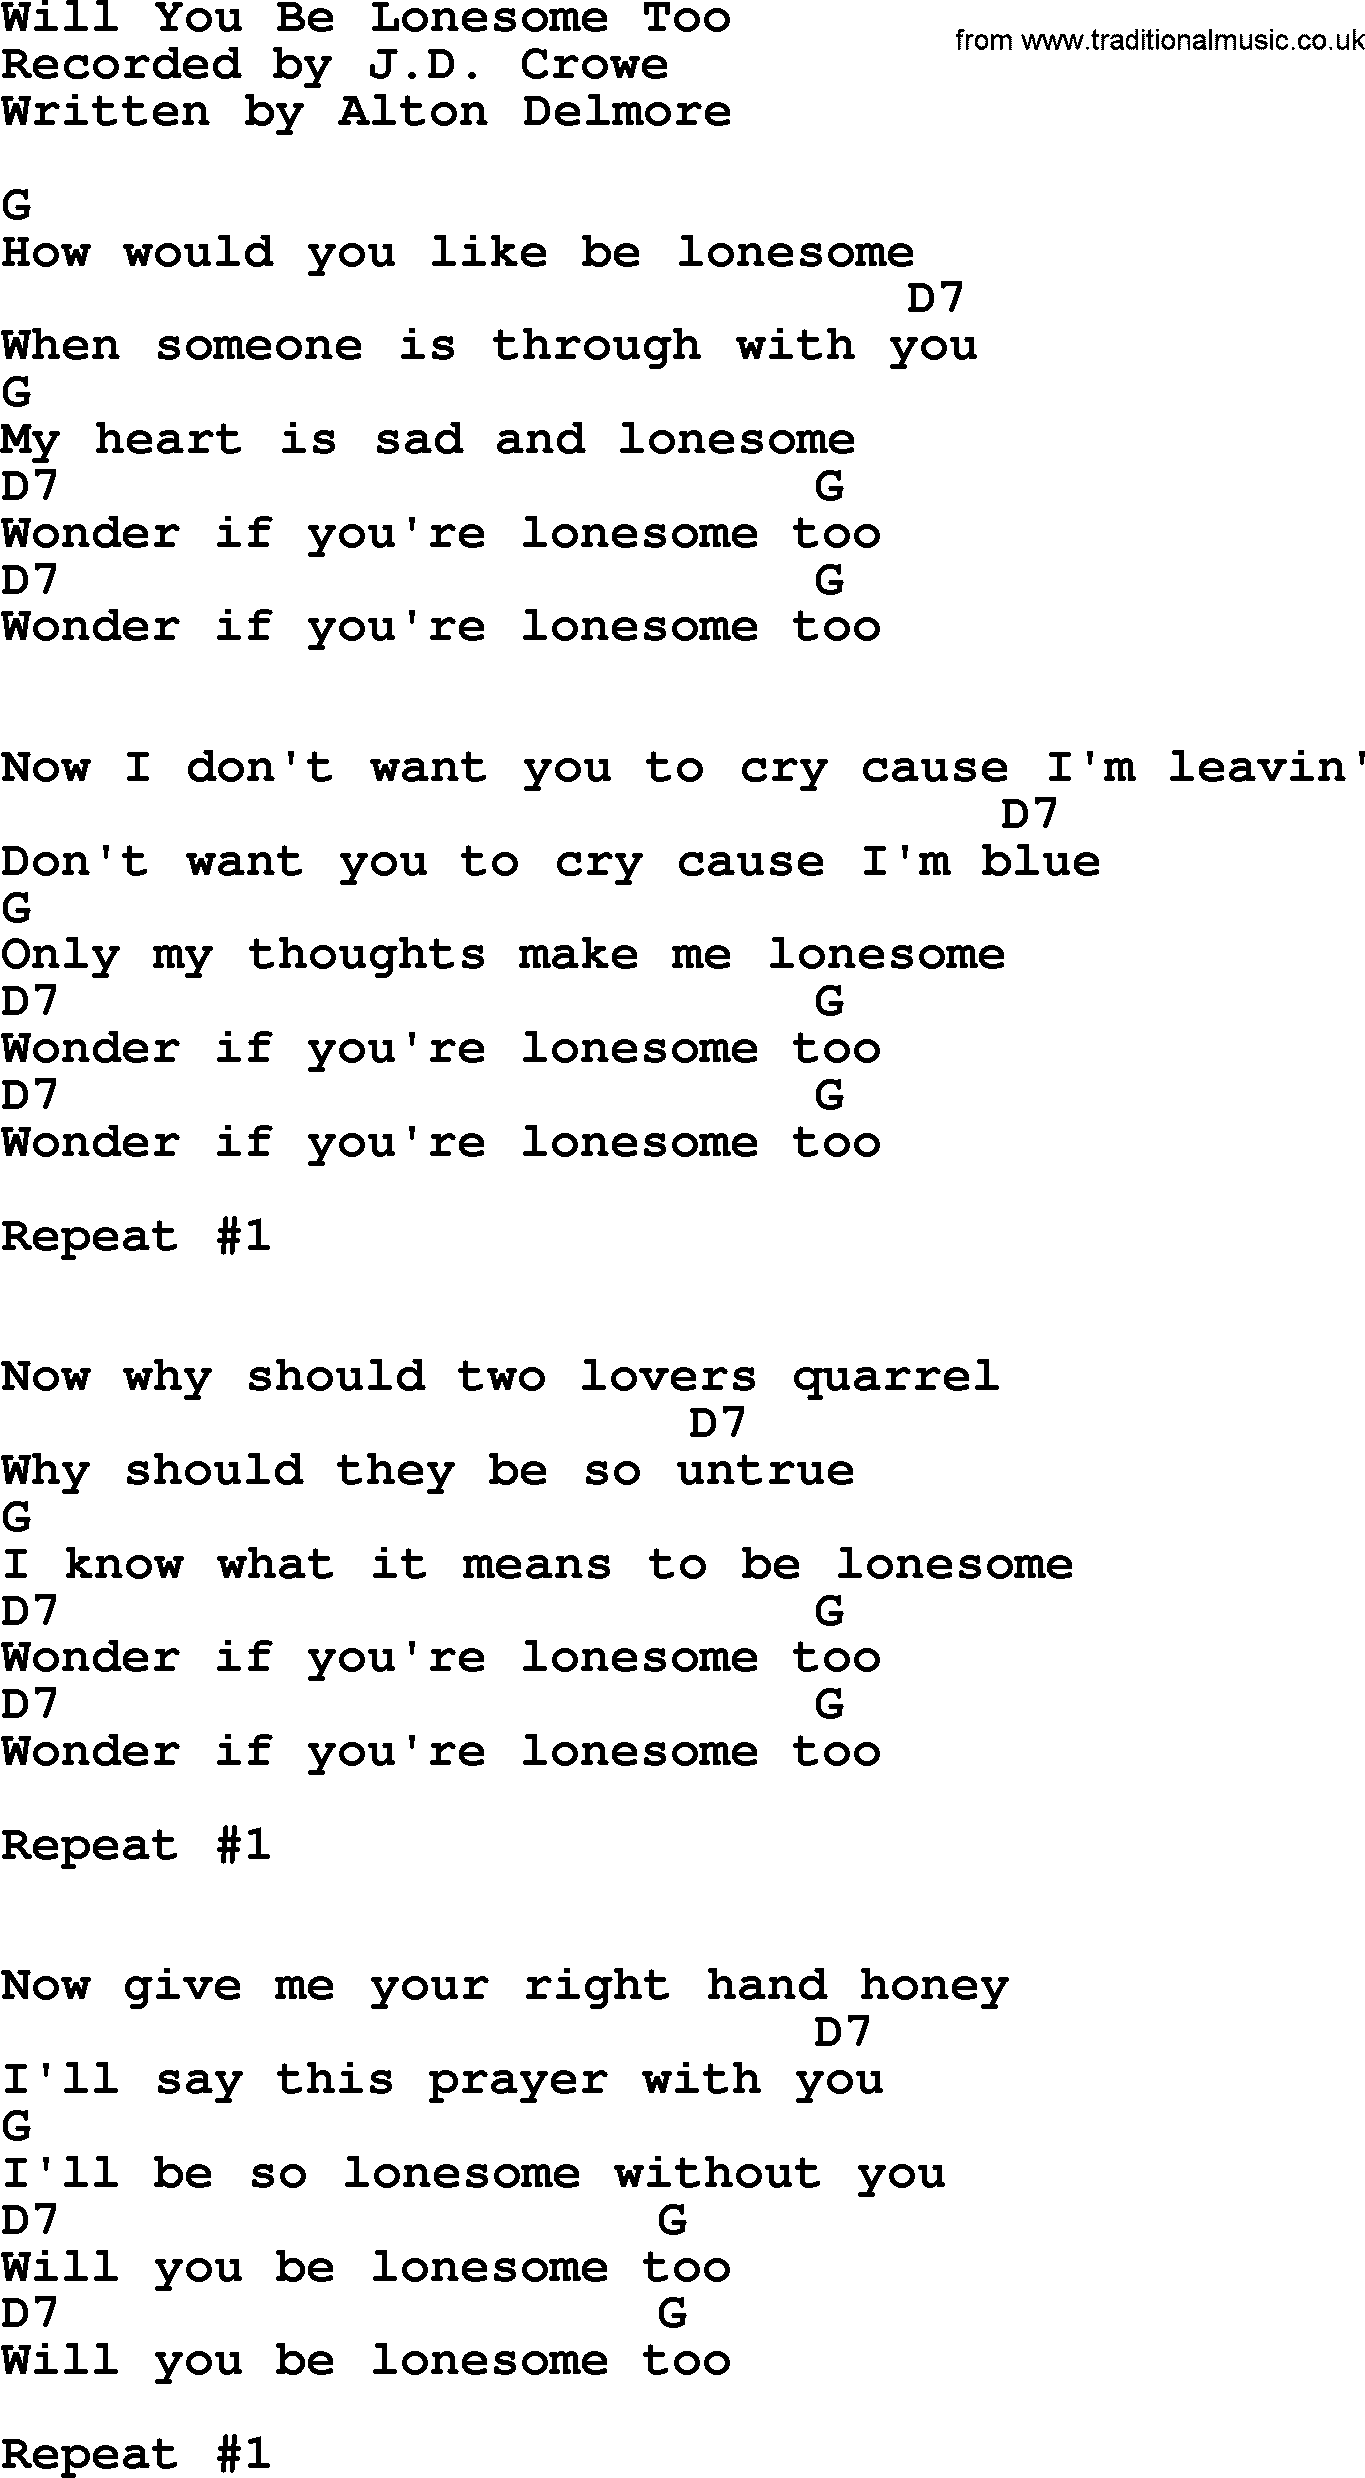 Bluegrass song: Will You Be Lonesome Too, lyrics and chords